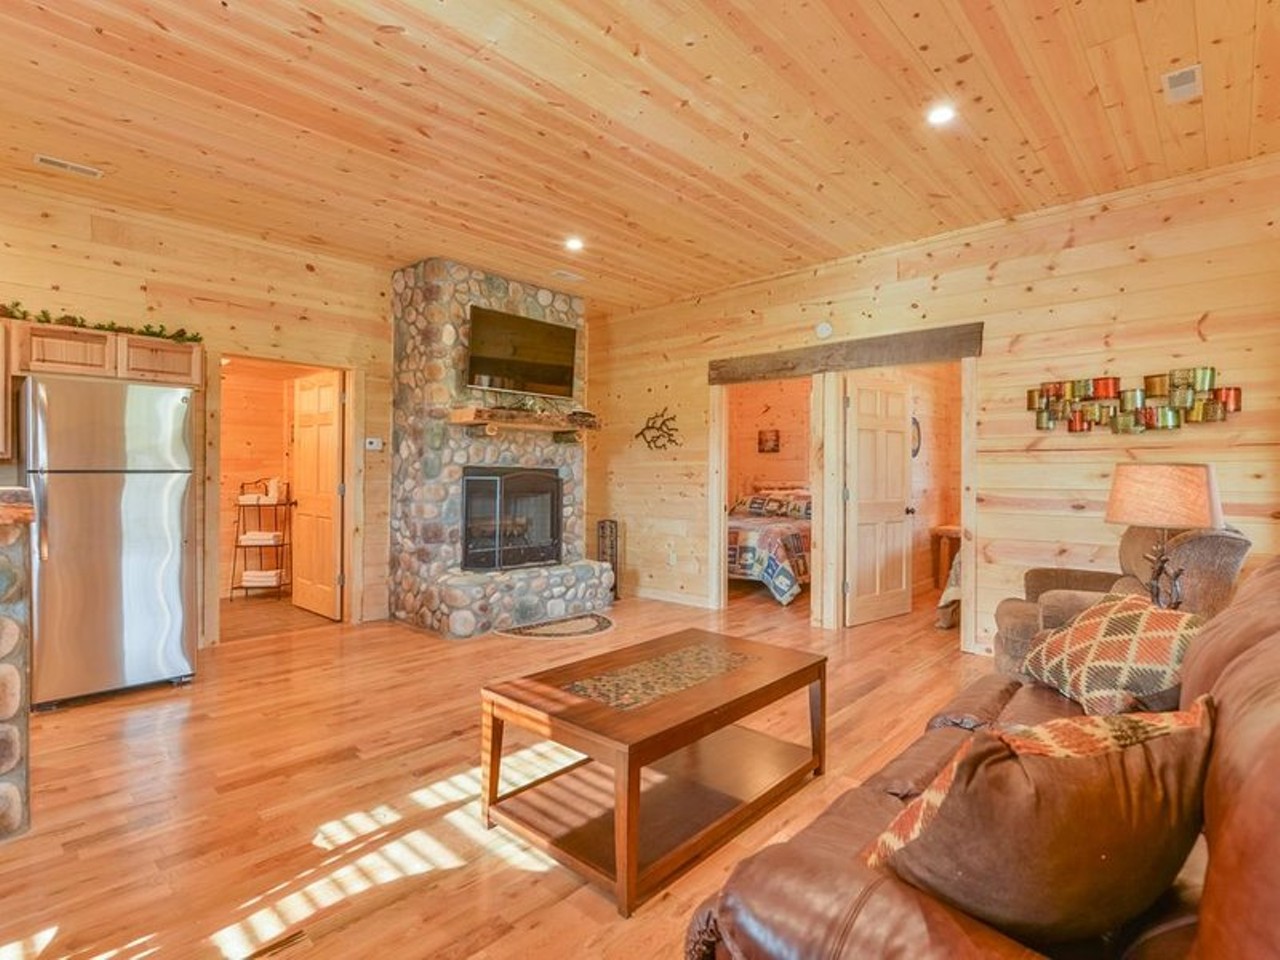 Little Chief Cabin
Laurelville, Ohio
Price upon request | Hosts 4 guests
"Little Chief Cabin Details: 
Guests: Up to 4 guests (guests 3 and younger are not counted in guest count figures. Properties are priced on a base rate and additional nightly guest charges will apply after the guest count exceeds the base rate) 
Pets: Up to 3 (dogs only) $30/pet/stay applies 
Bedrooms: 2 (bed linens, pillows, comforters provided) 
Baths: 1 (bath towels, hand towel, wash clothes, hand soap provided- personal toiletry/shower items not provided) 
Minimum Booking Age- 21&#148; &#151; Tripadvisor 
Photo via tripadvisor.com